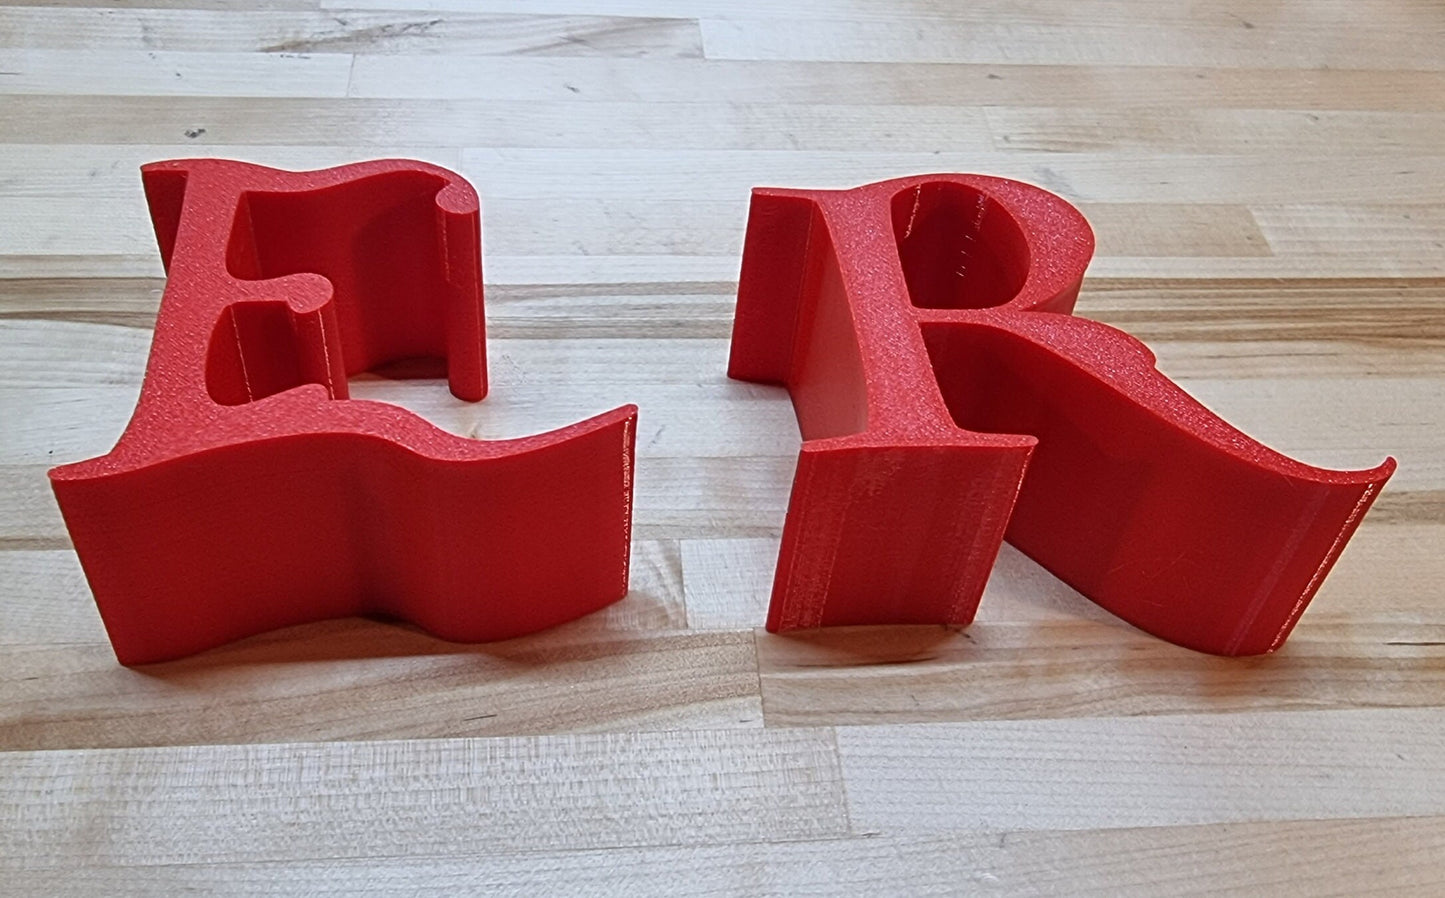 Totally Custom 2 Inch Thick 3D Sign Letters (Outdoor). Any Font, Size or Color! Our Outdoor 3D Sign Letters Make An Impact